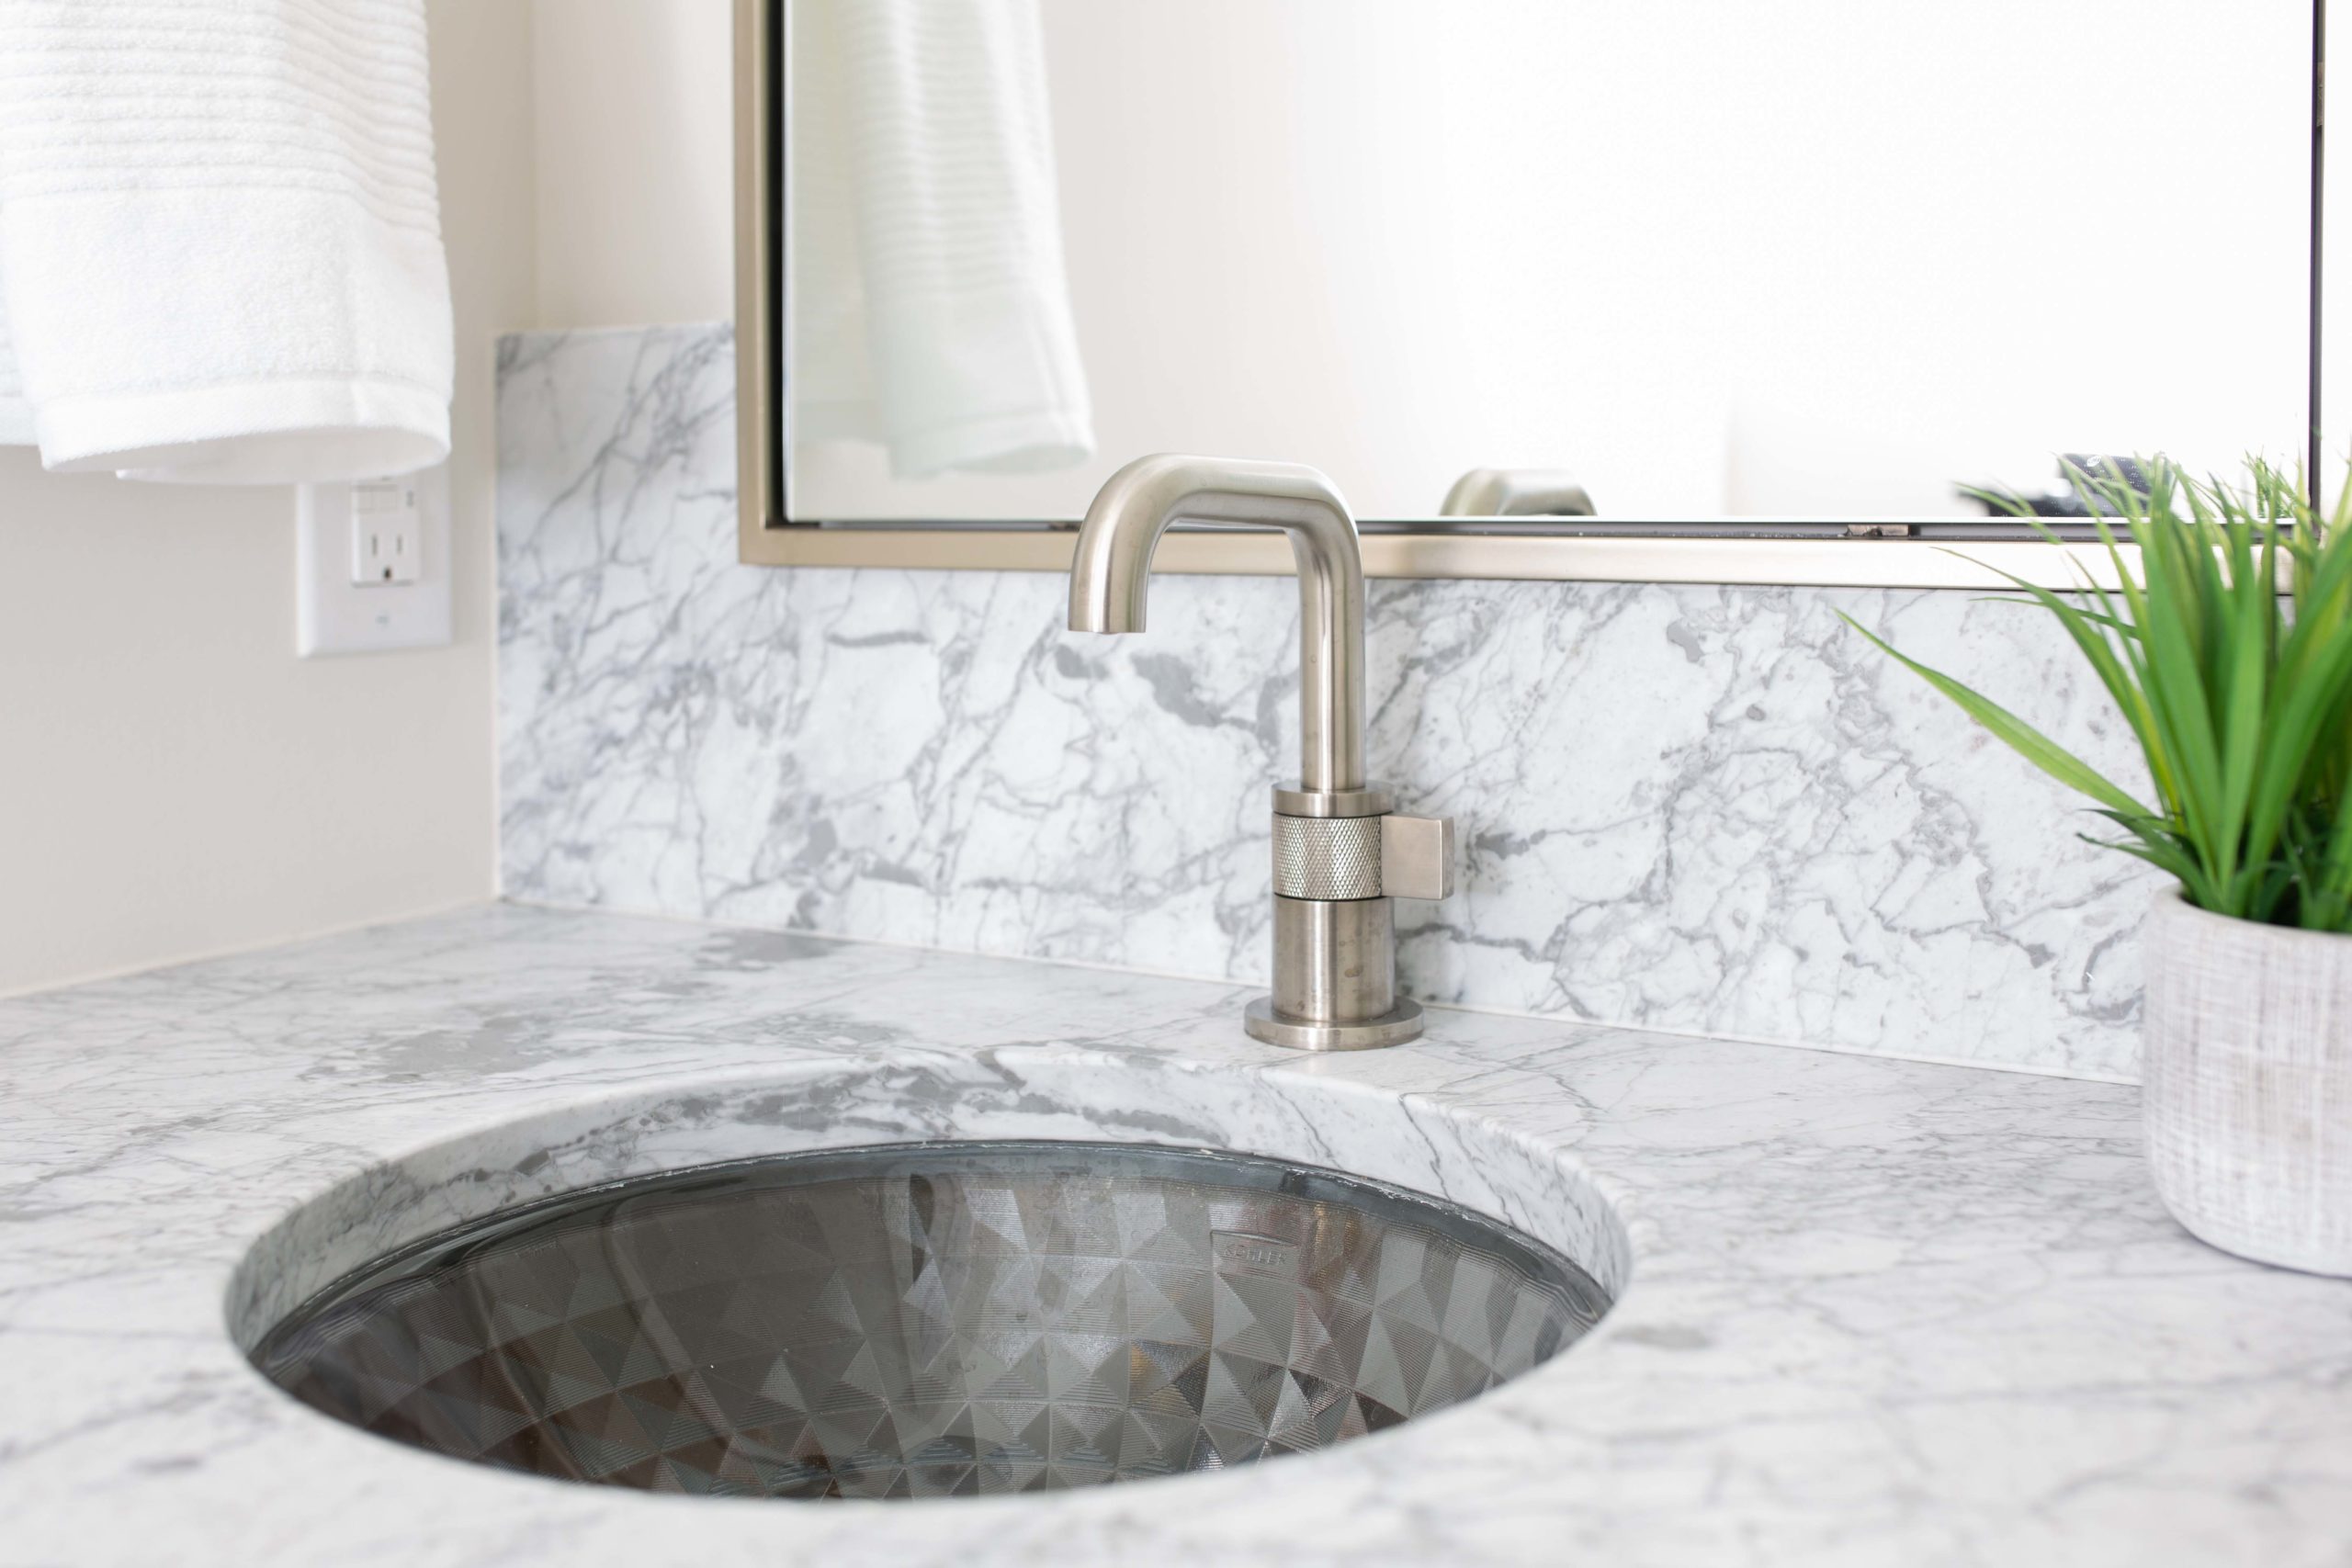 A modern bathroom sink with a marble countertop in a lake home build.